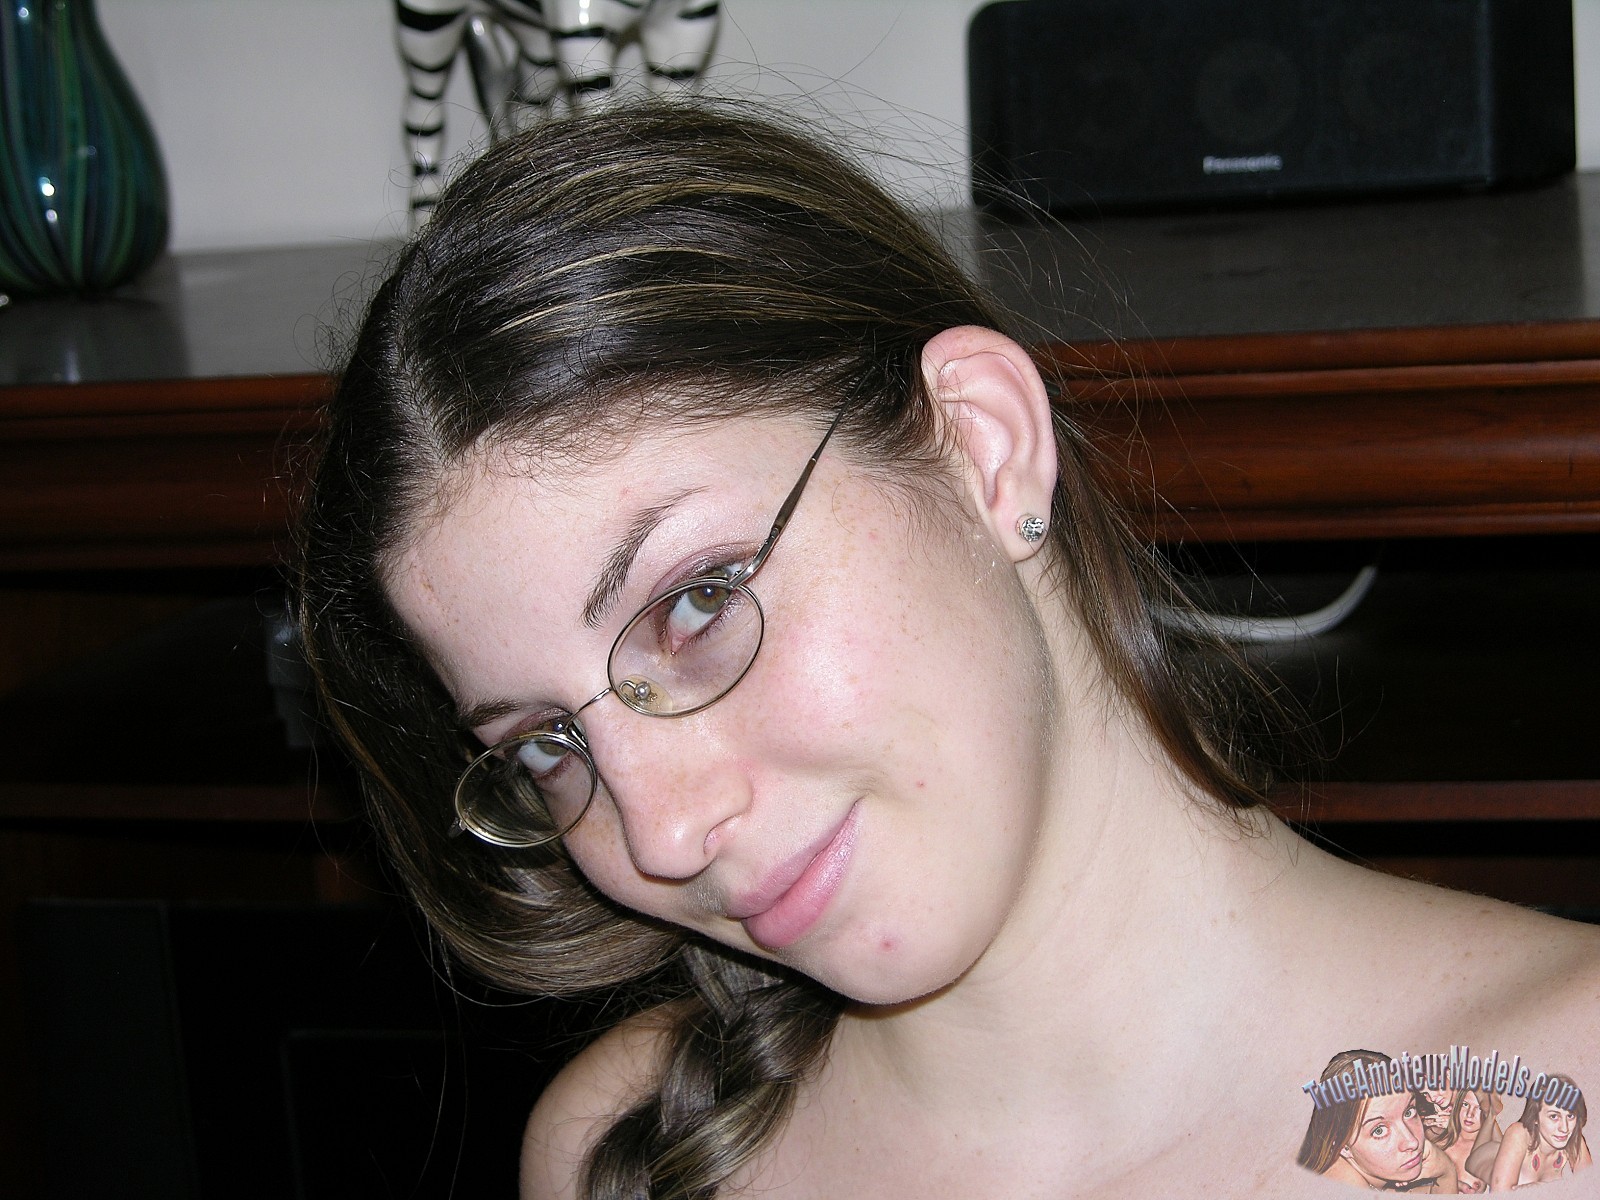 xpics - sex in glasses Amateur tiny breasted petite teen in glasses